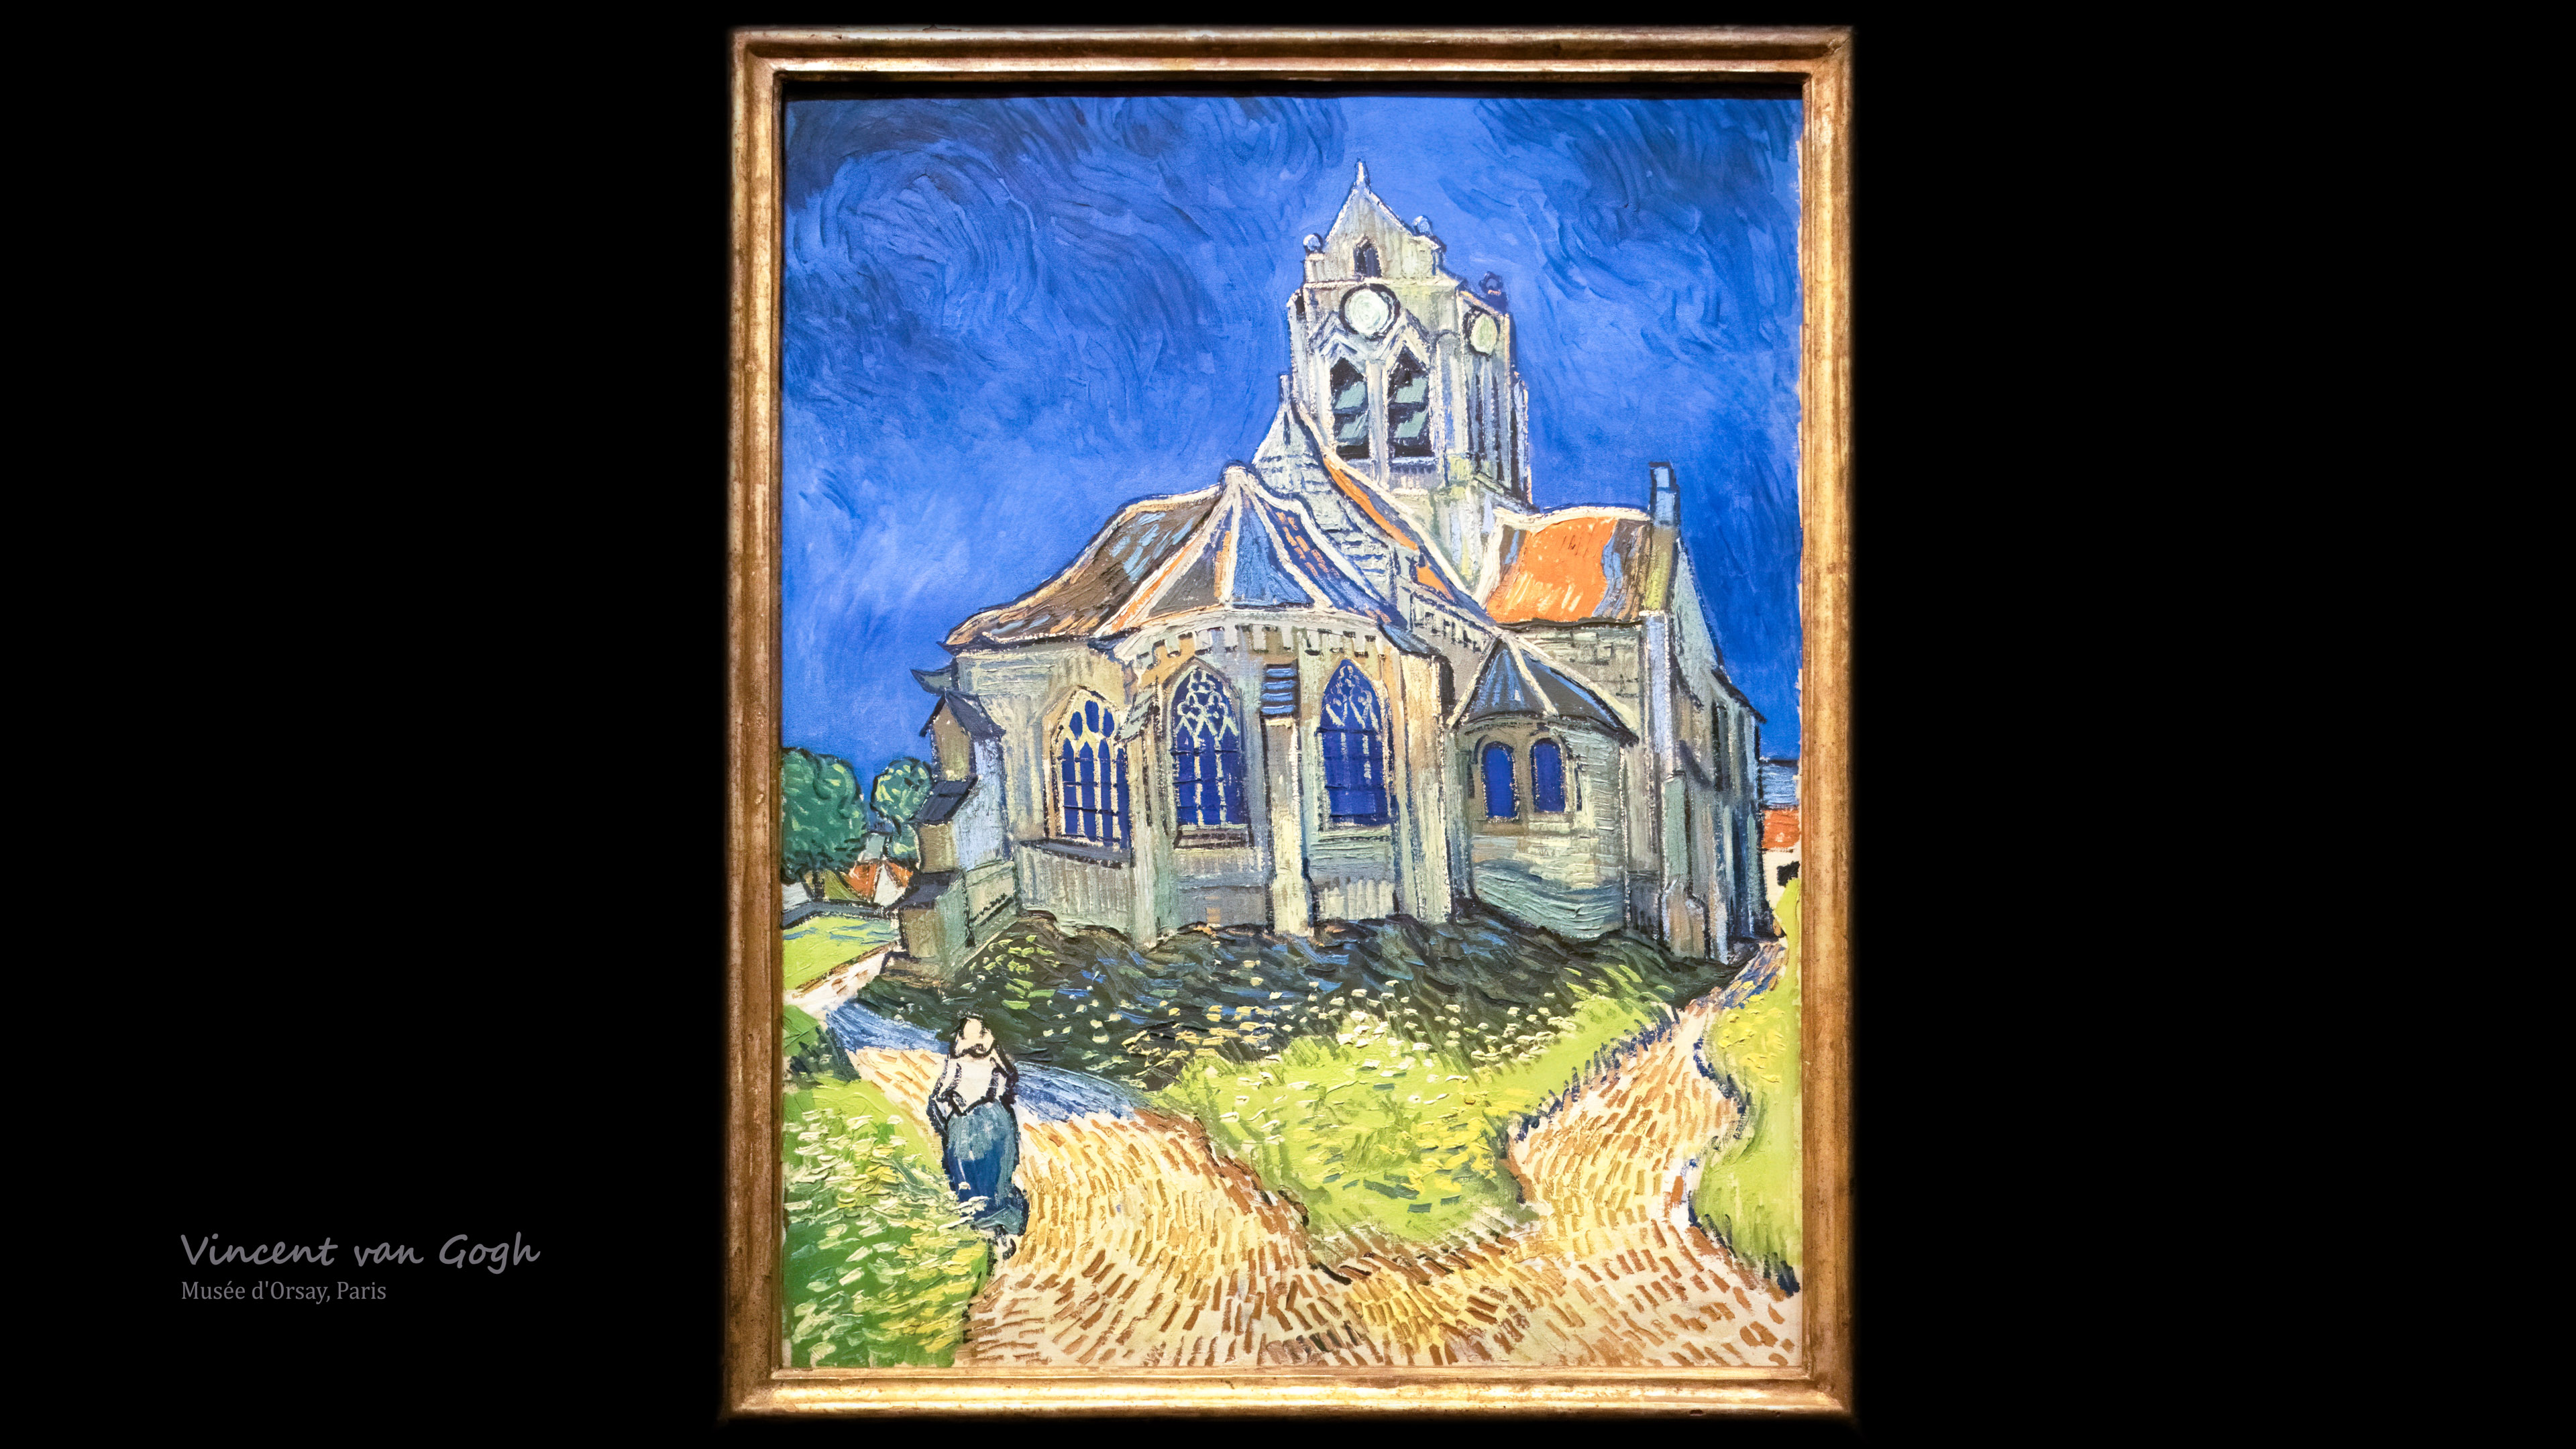 Capture the melancholic beauty of The Church at Auvers wallpaper, transforming your desktop into a serene haven of Van Gogh's artistic expression.